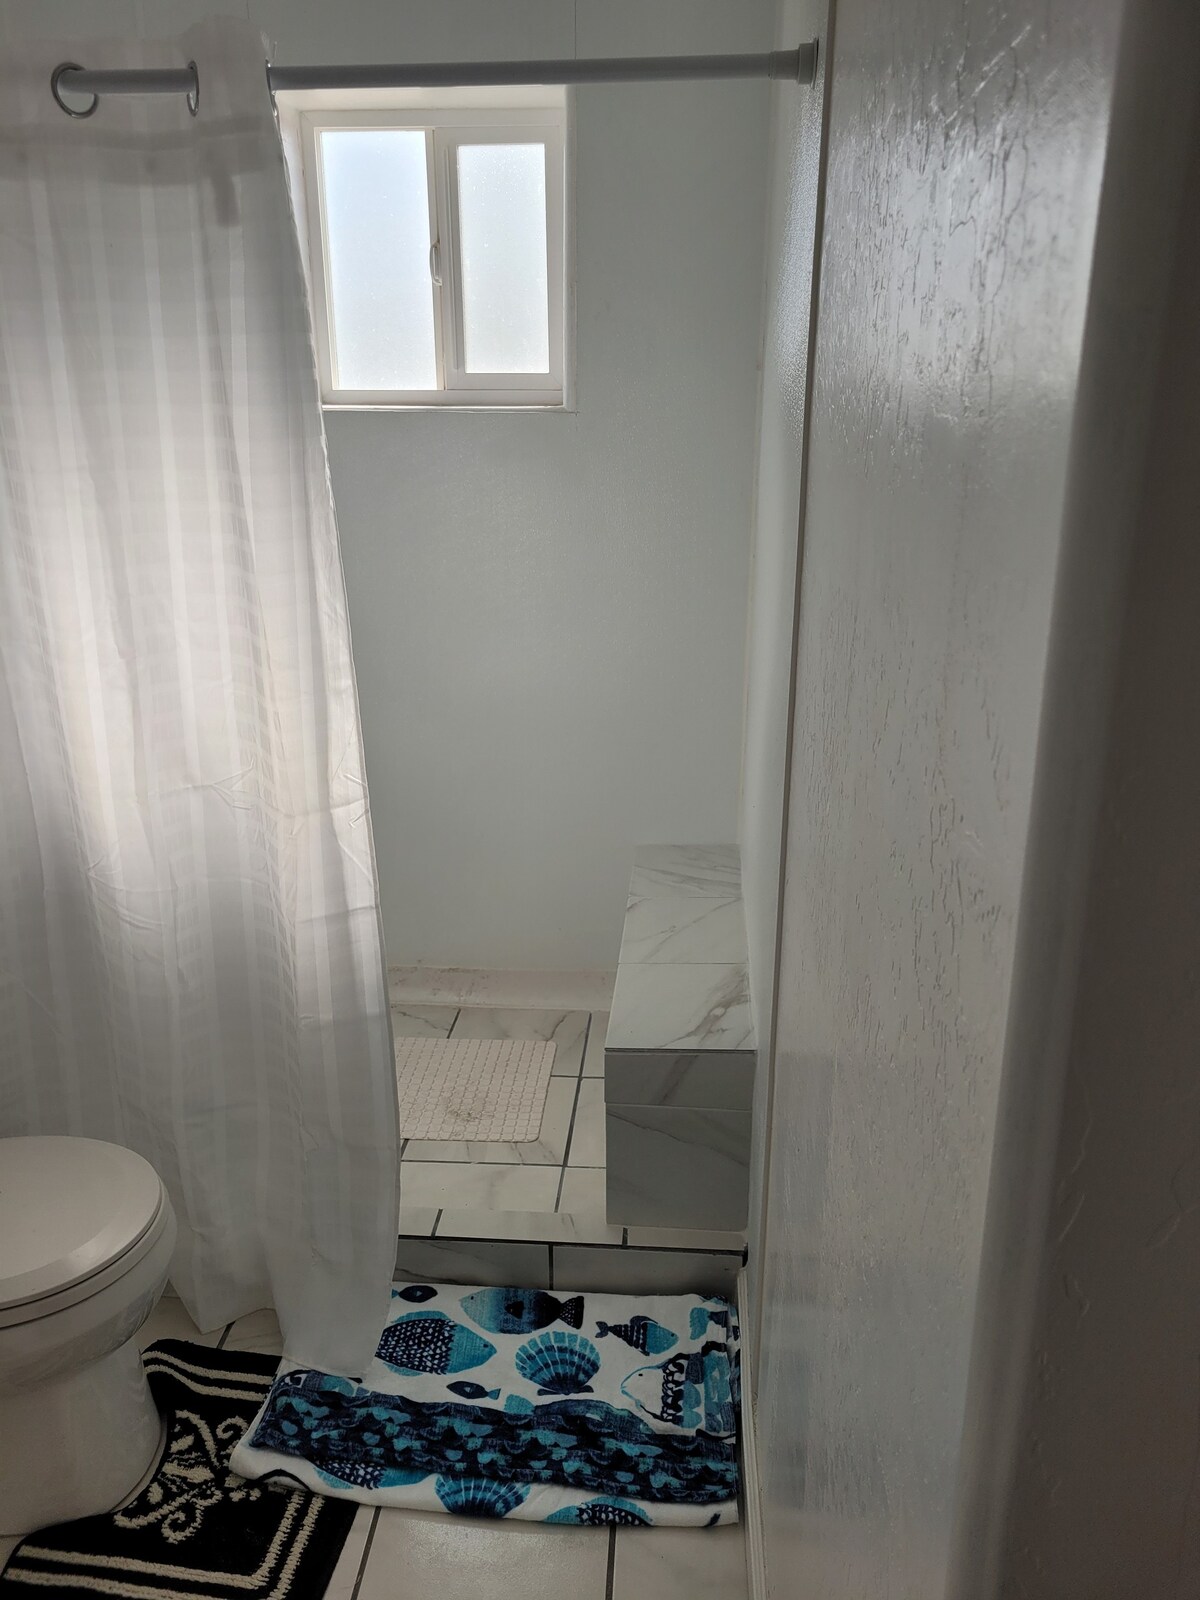 One bedroom (private shower) in a 3 bedroom home